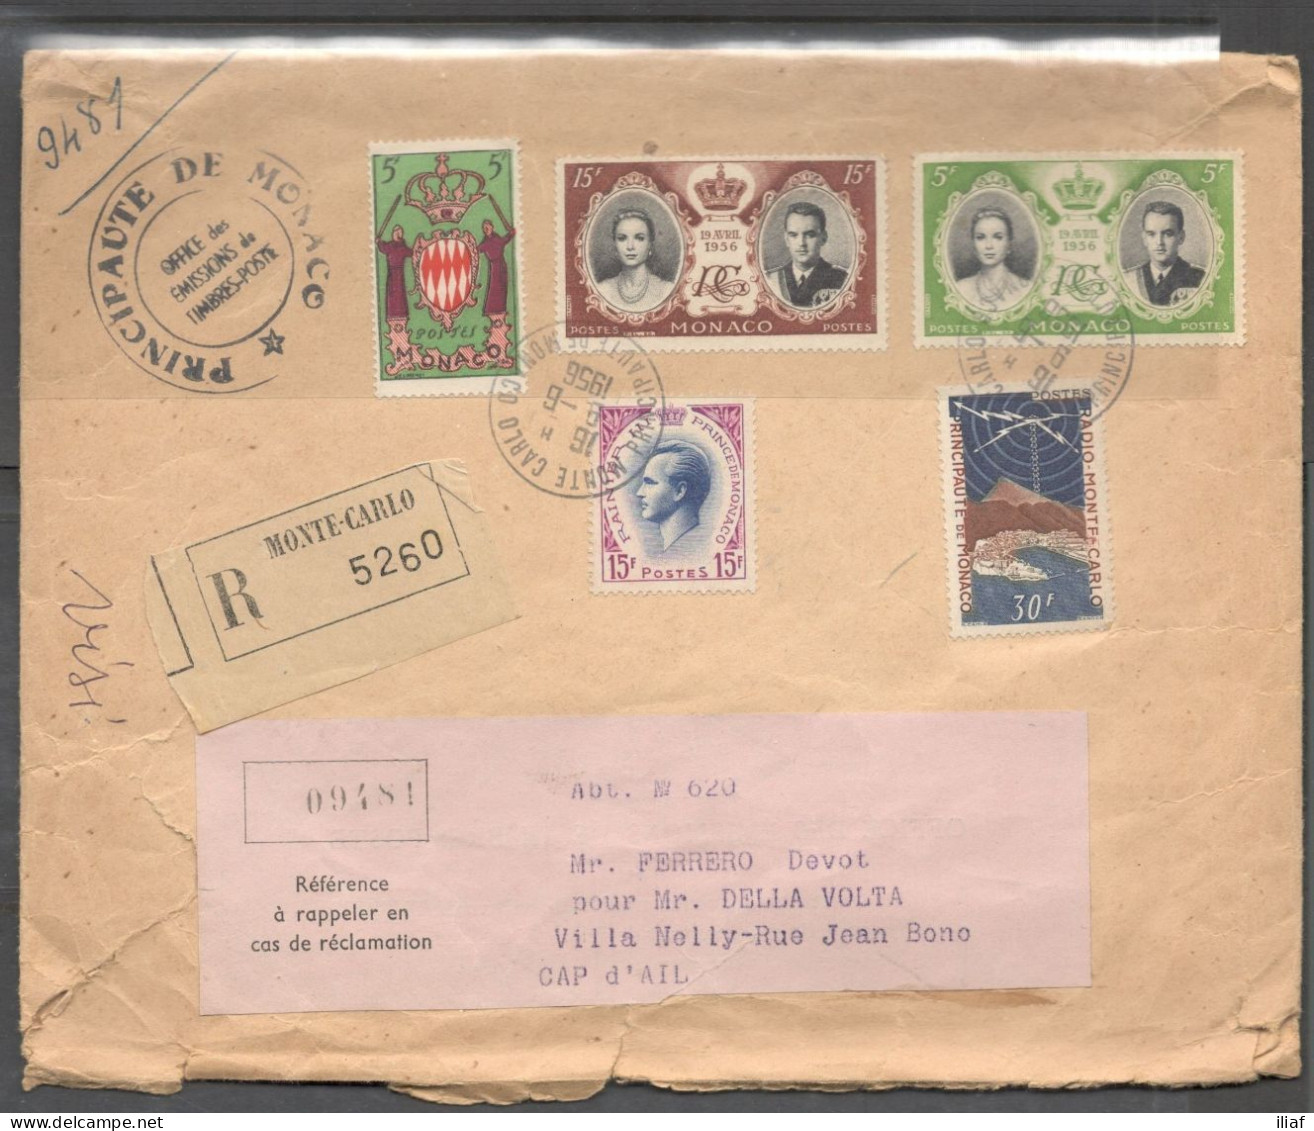 Monaco. Stamps Sc. 280, 318, 337, 369-370 On Registered Letter, Sent From Monte-Carlo, Monaco On 9.06.1956 To Cap-d'Ail - Covers & Documents